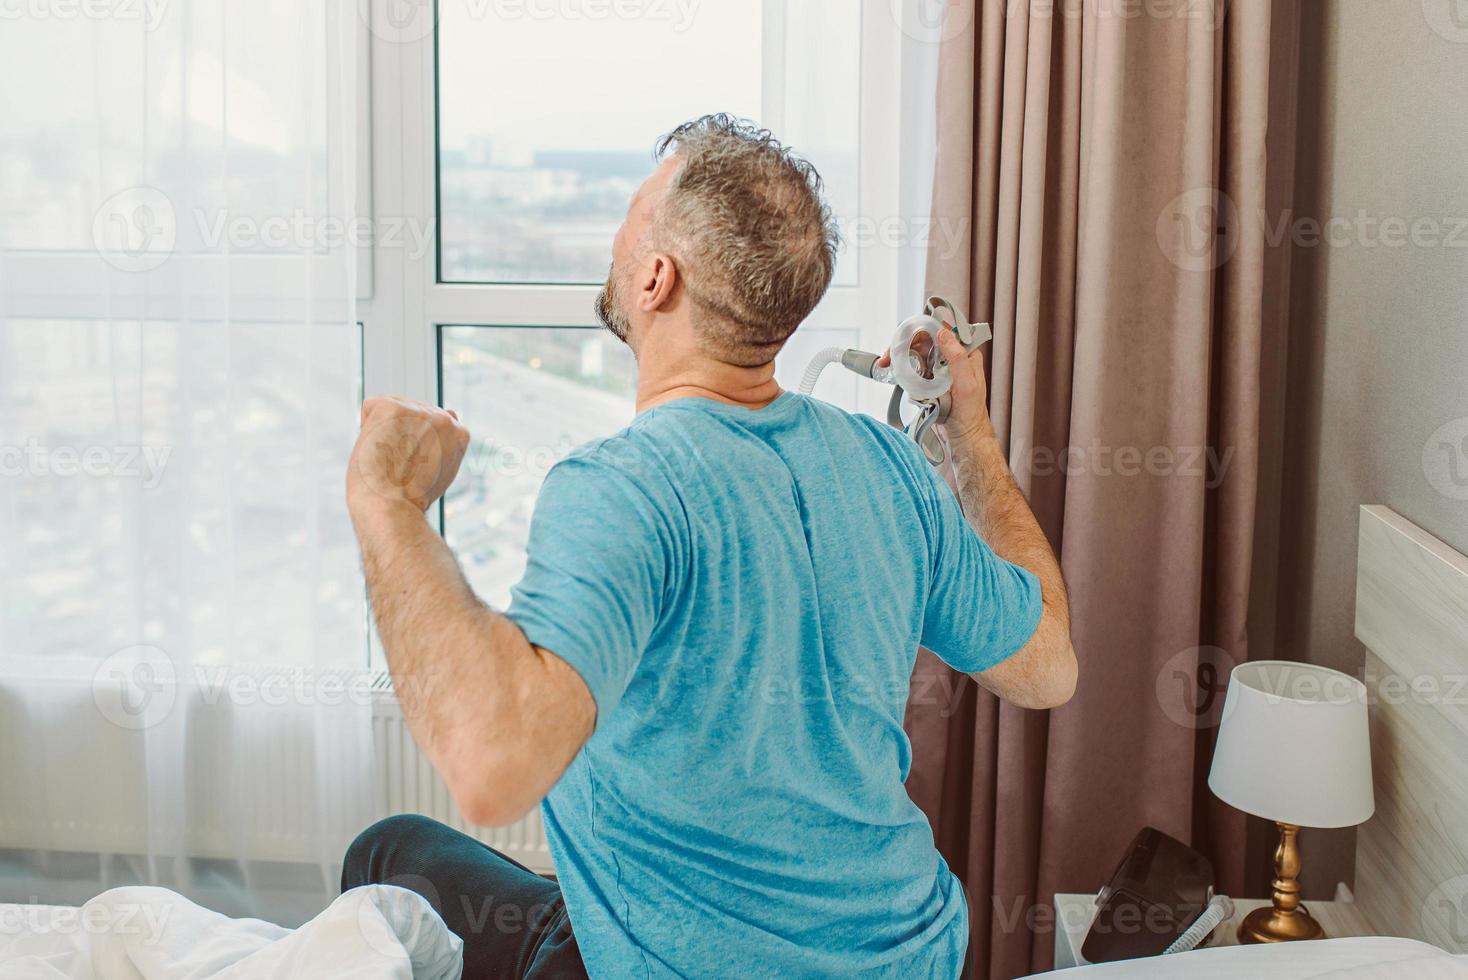 Happy rested man with chronic breathing issues after using  CPAP machine sitting on the bed in bedroom. Healthcare, CPAP, Obstructive sleep apnea therapy, snoring concept photo